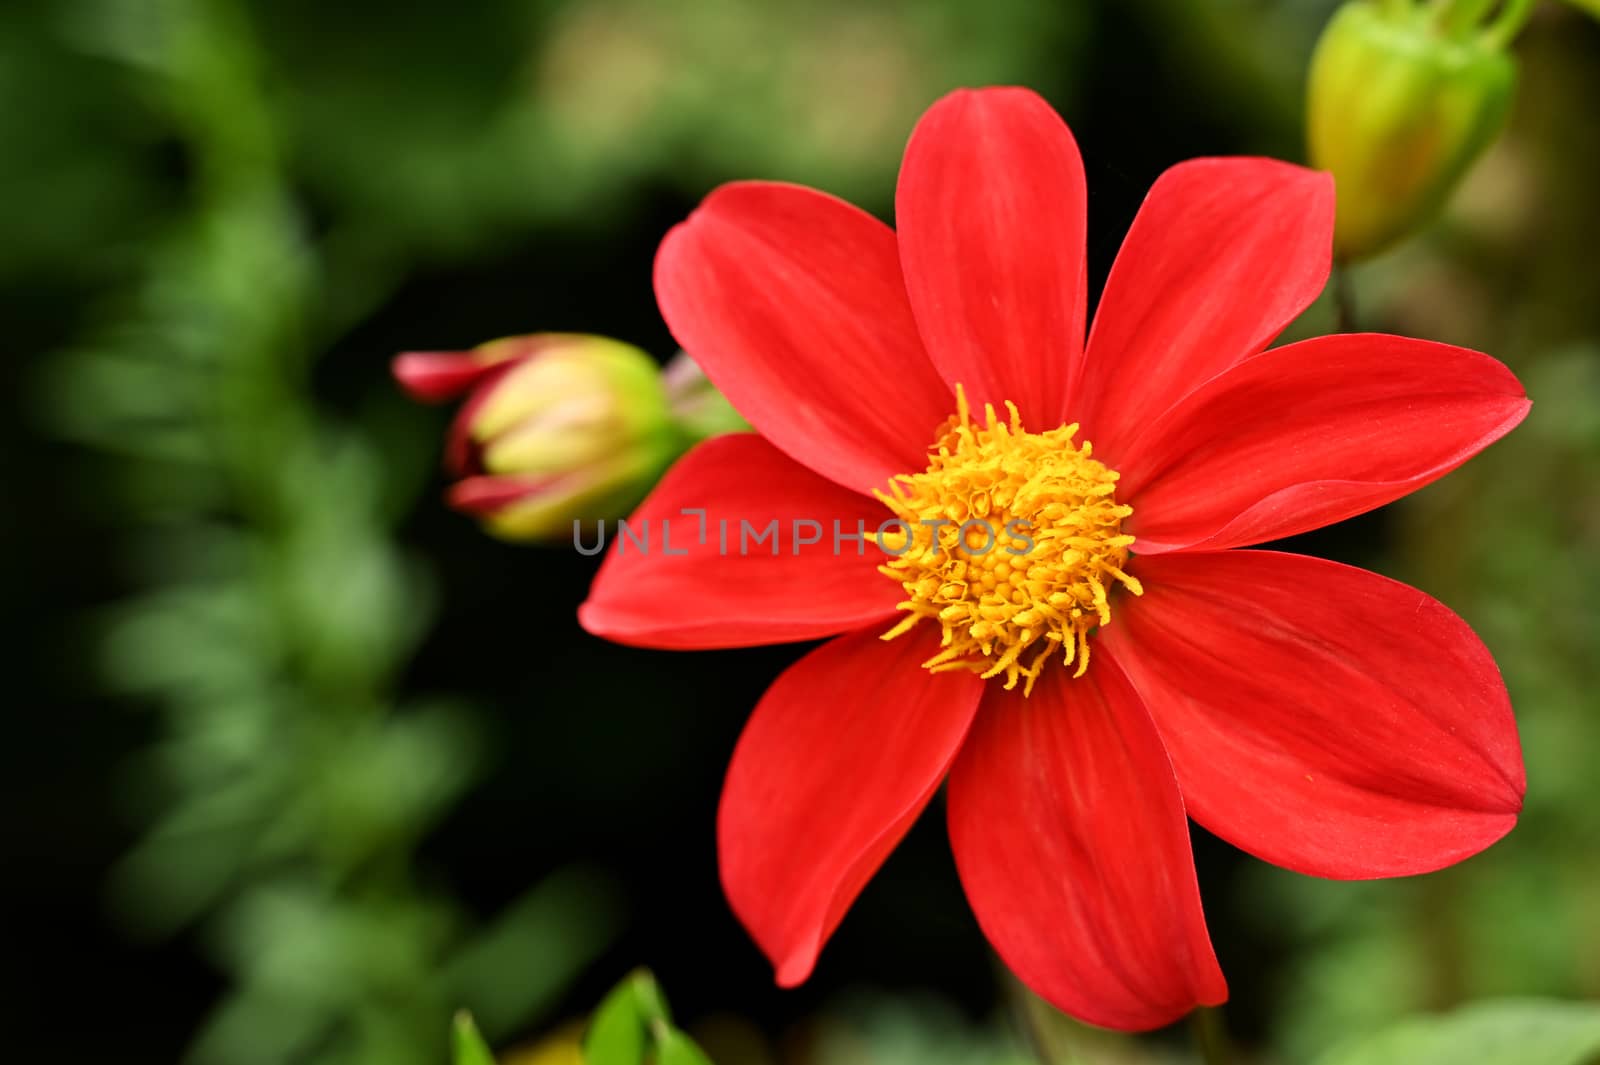 Flower in the garden with large red petals, isolated, close-up